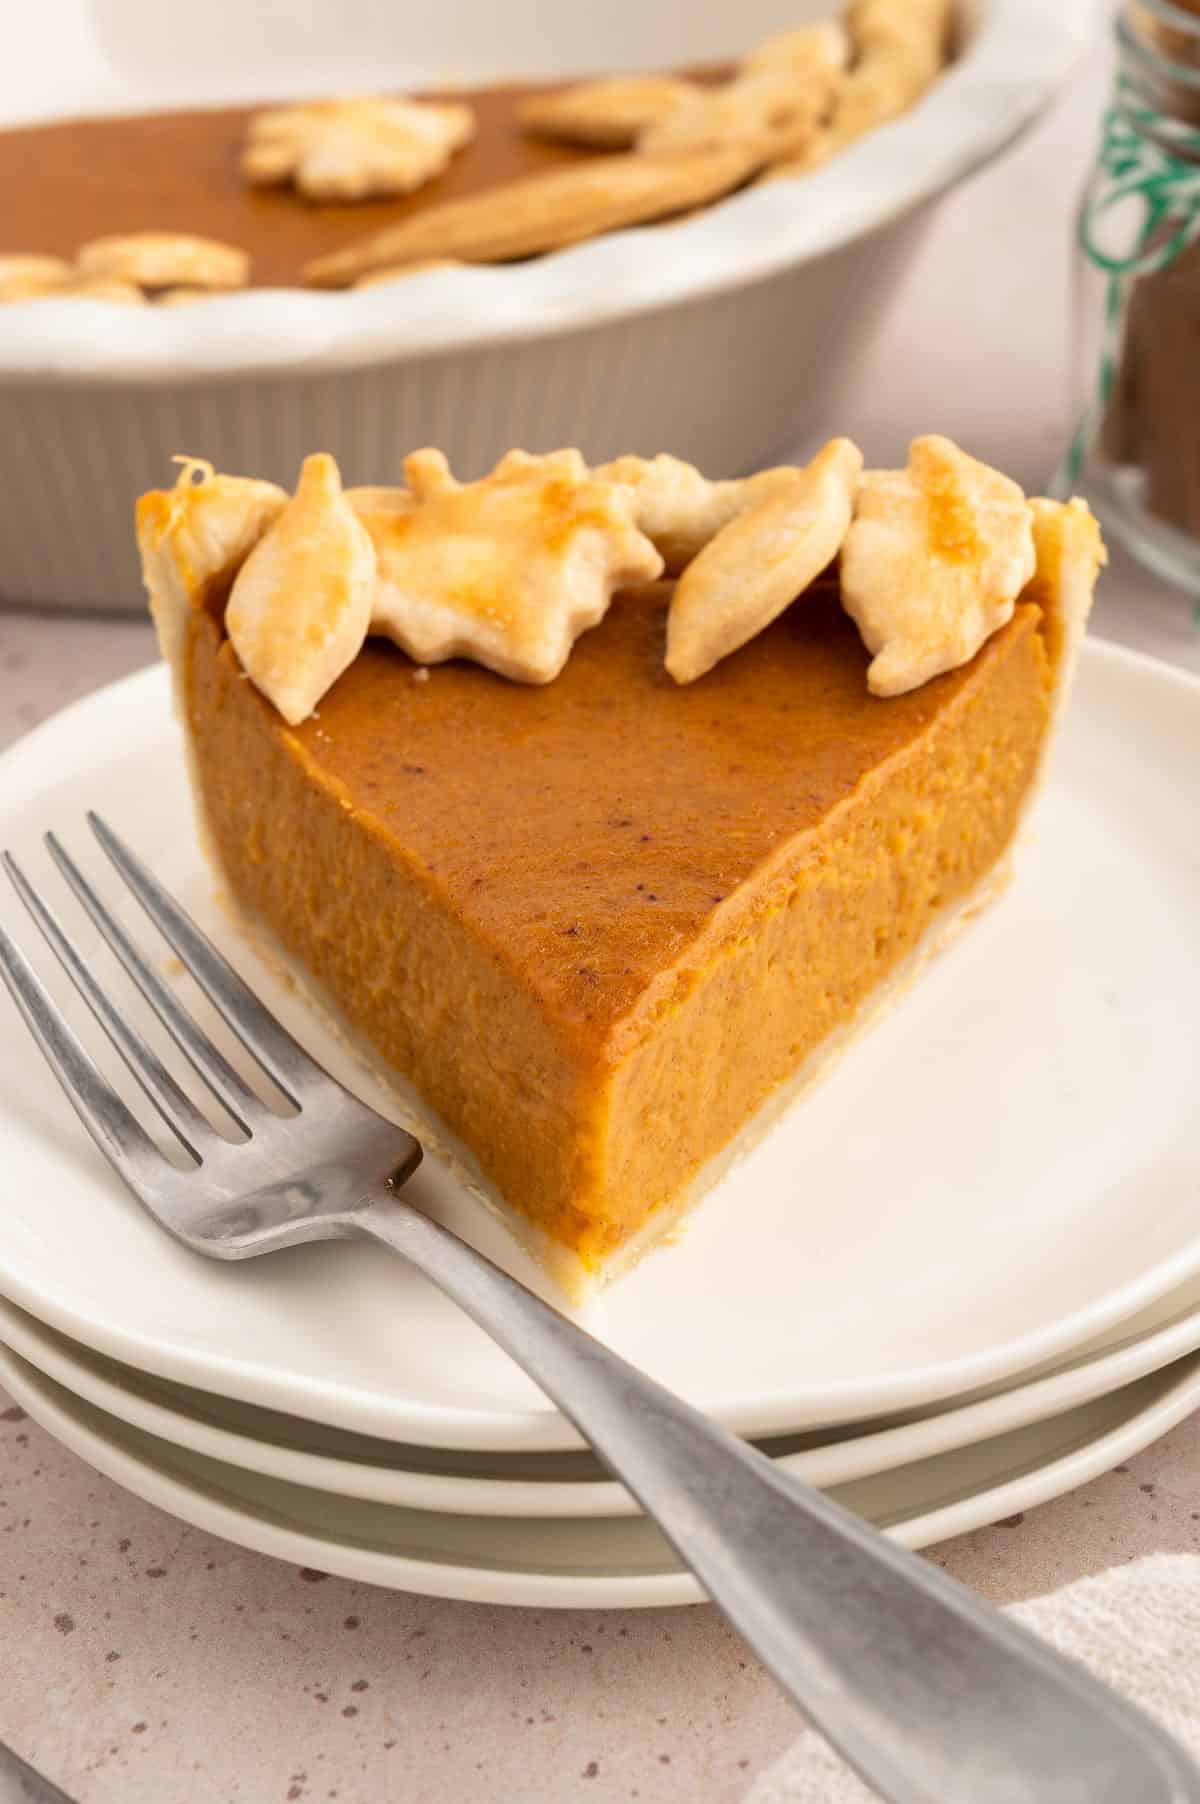 Vegan sweet potato pie on a plate with a fork and decorated with pastry leaves.